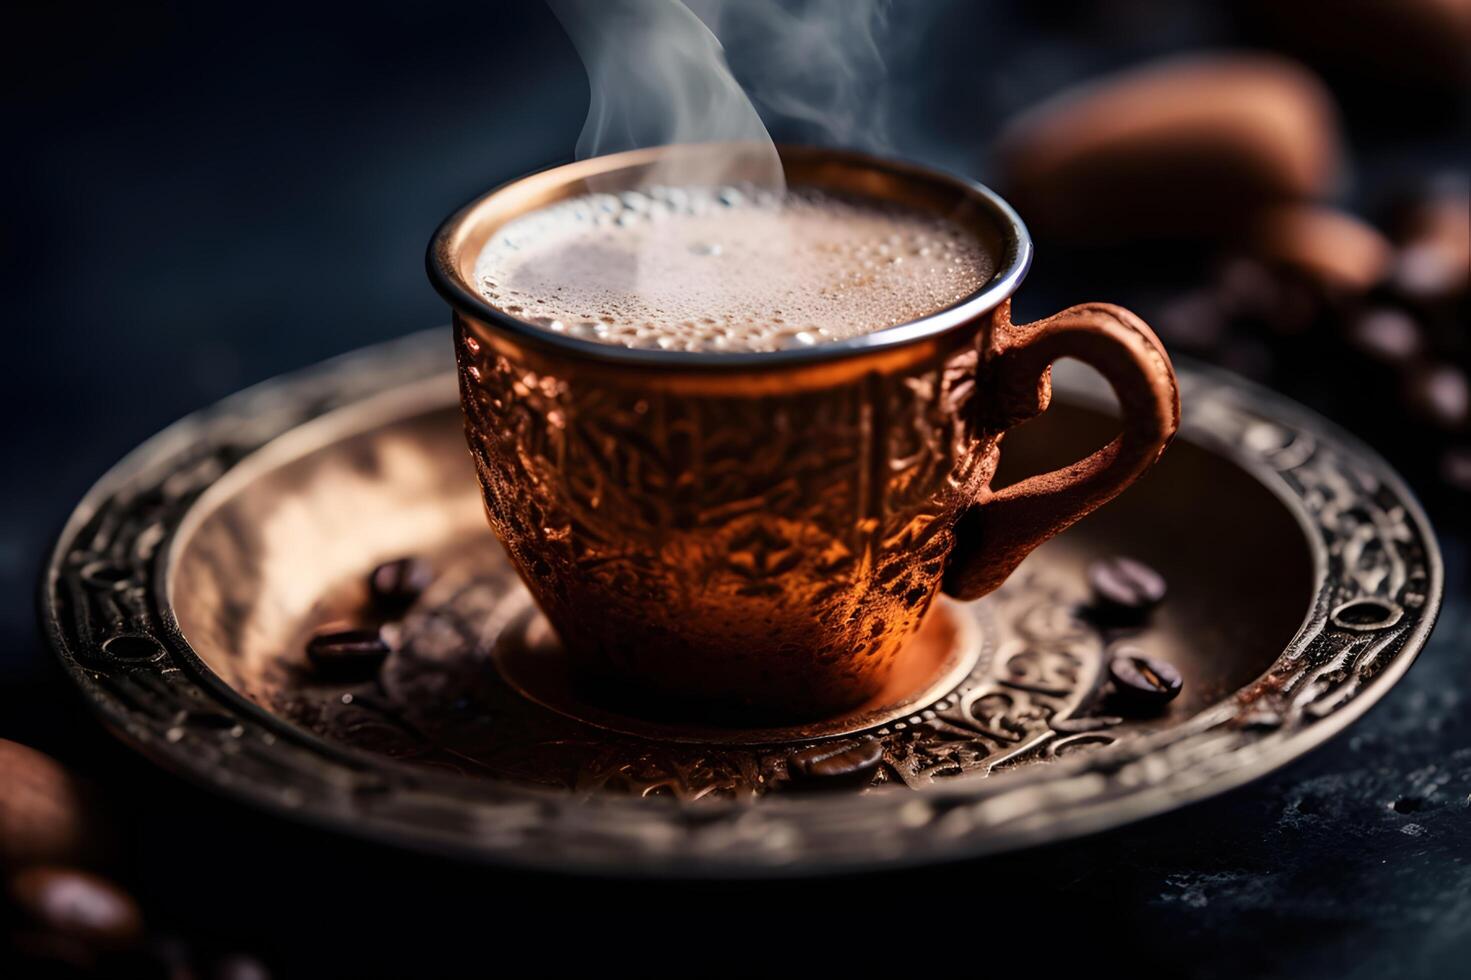 traditional Turkish coffee with foam on top, photo